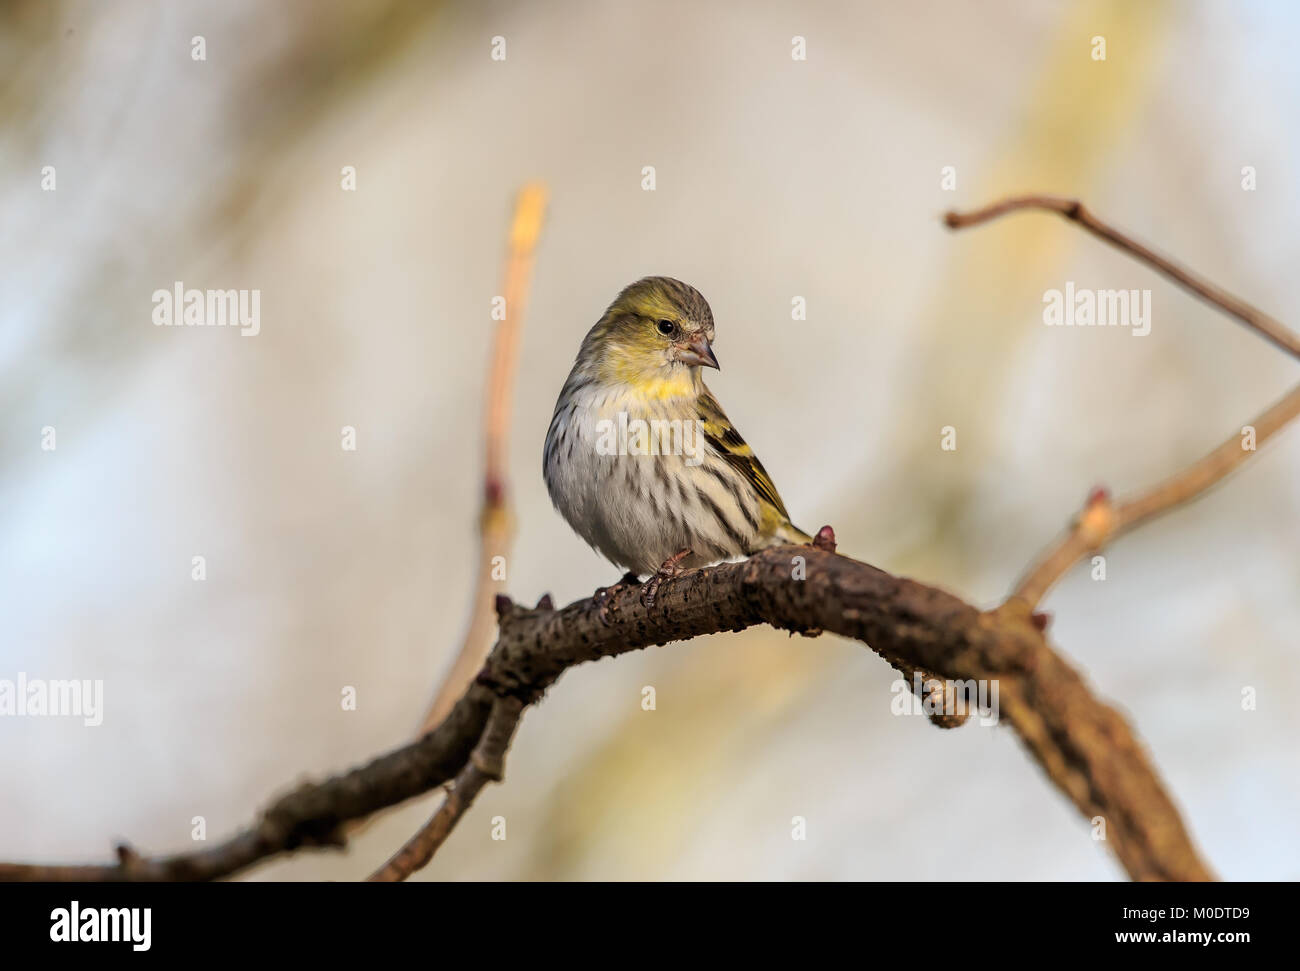 The Eurasian siskin is a small passerine bird in the finch family Fringillidae. It is also called the European siskin, common siskin or just siskin. Stock Photo